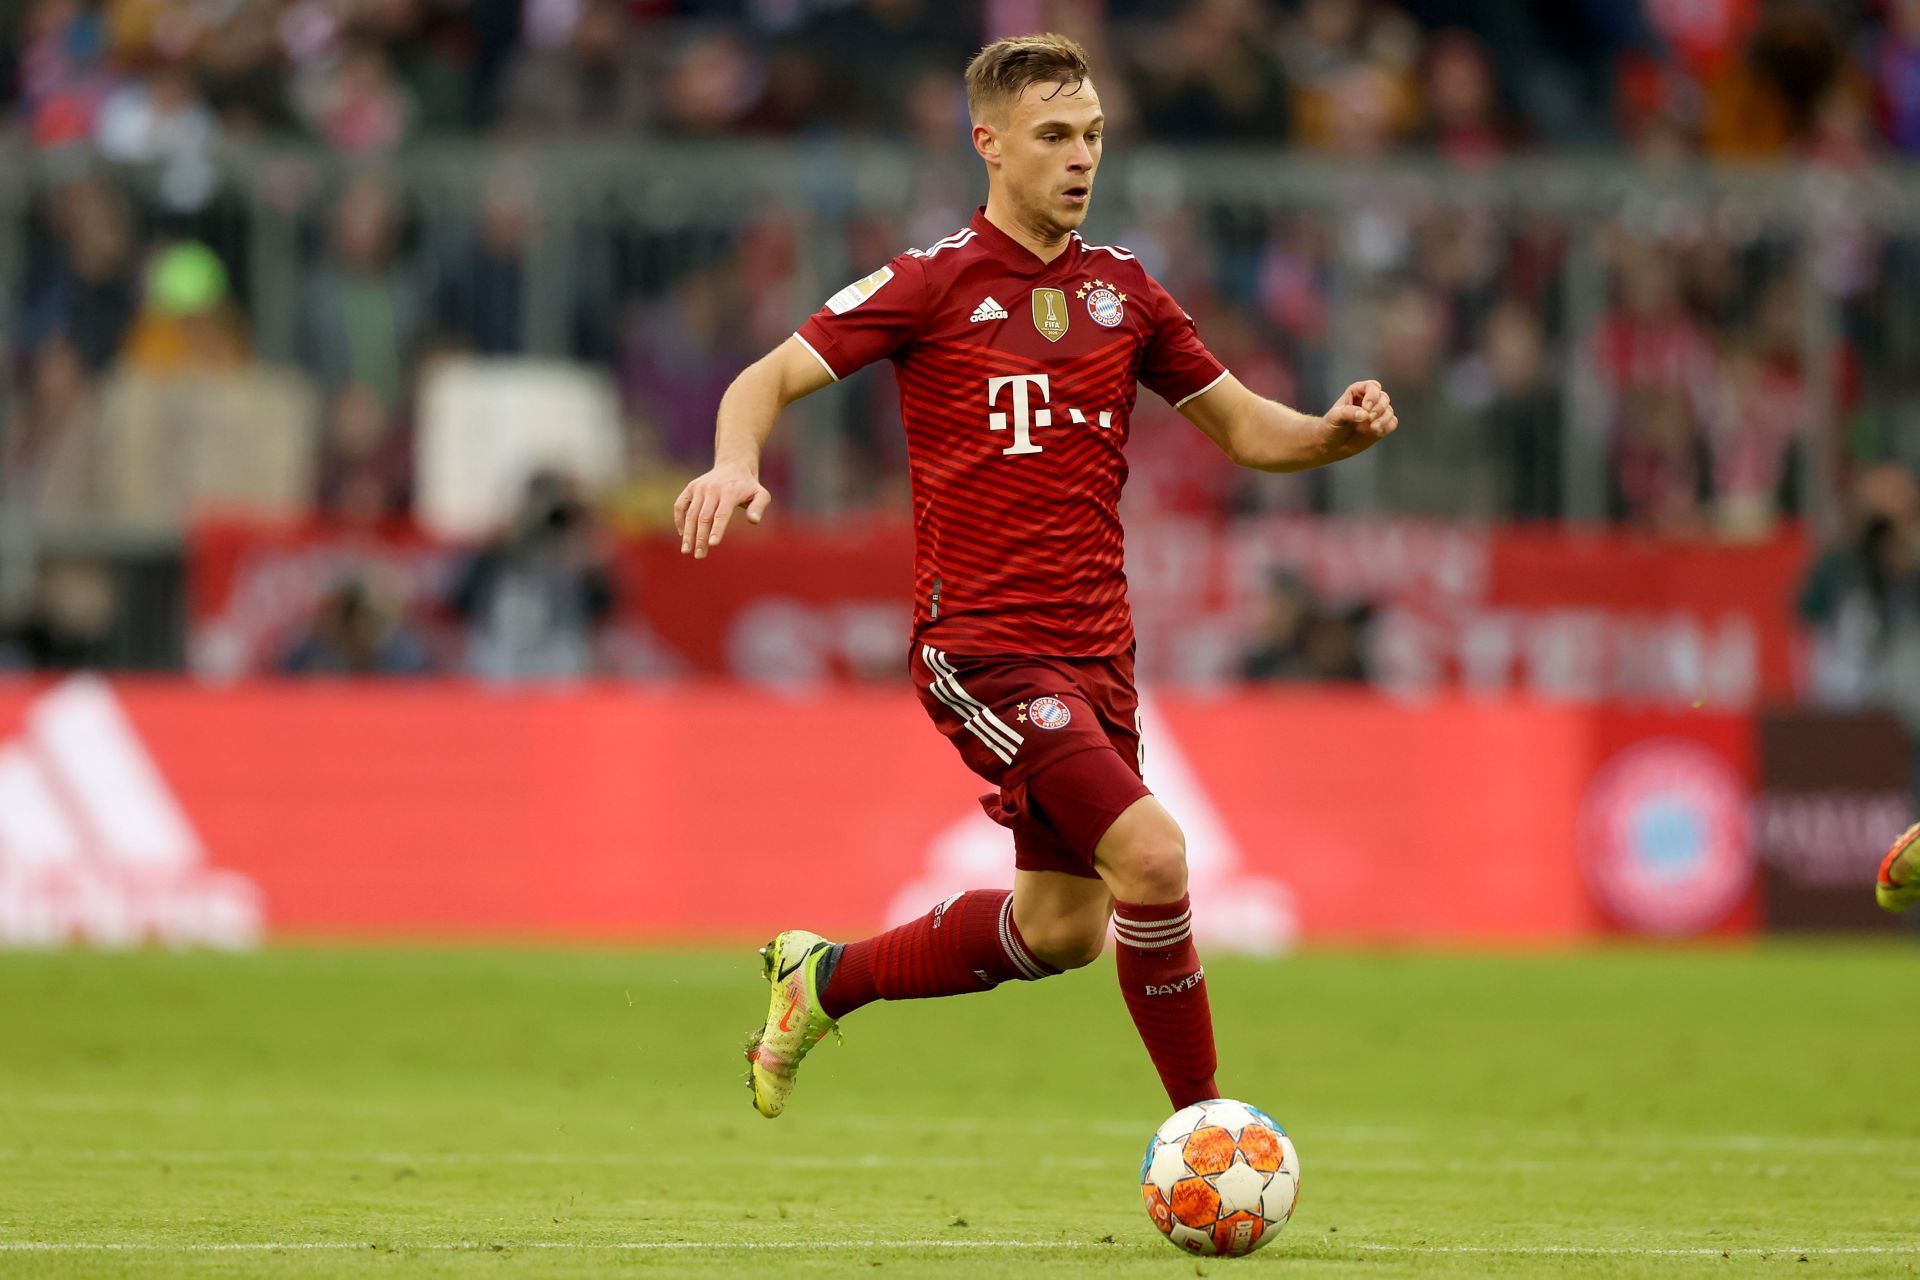 Joshua Kimmich is one of the most versatile players in world football.